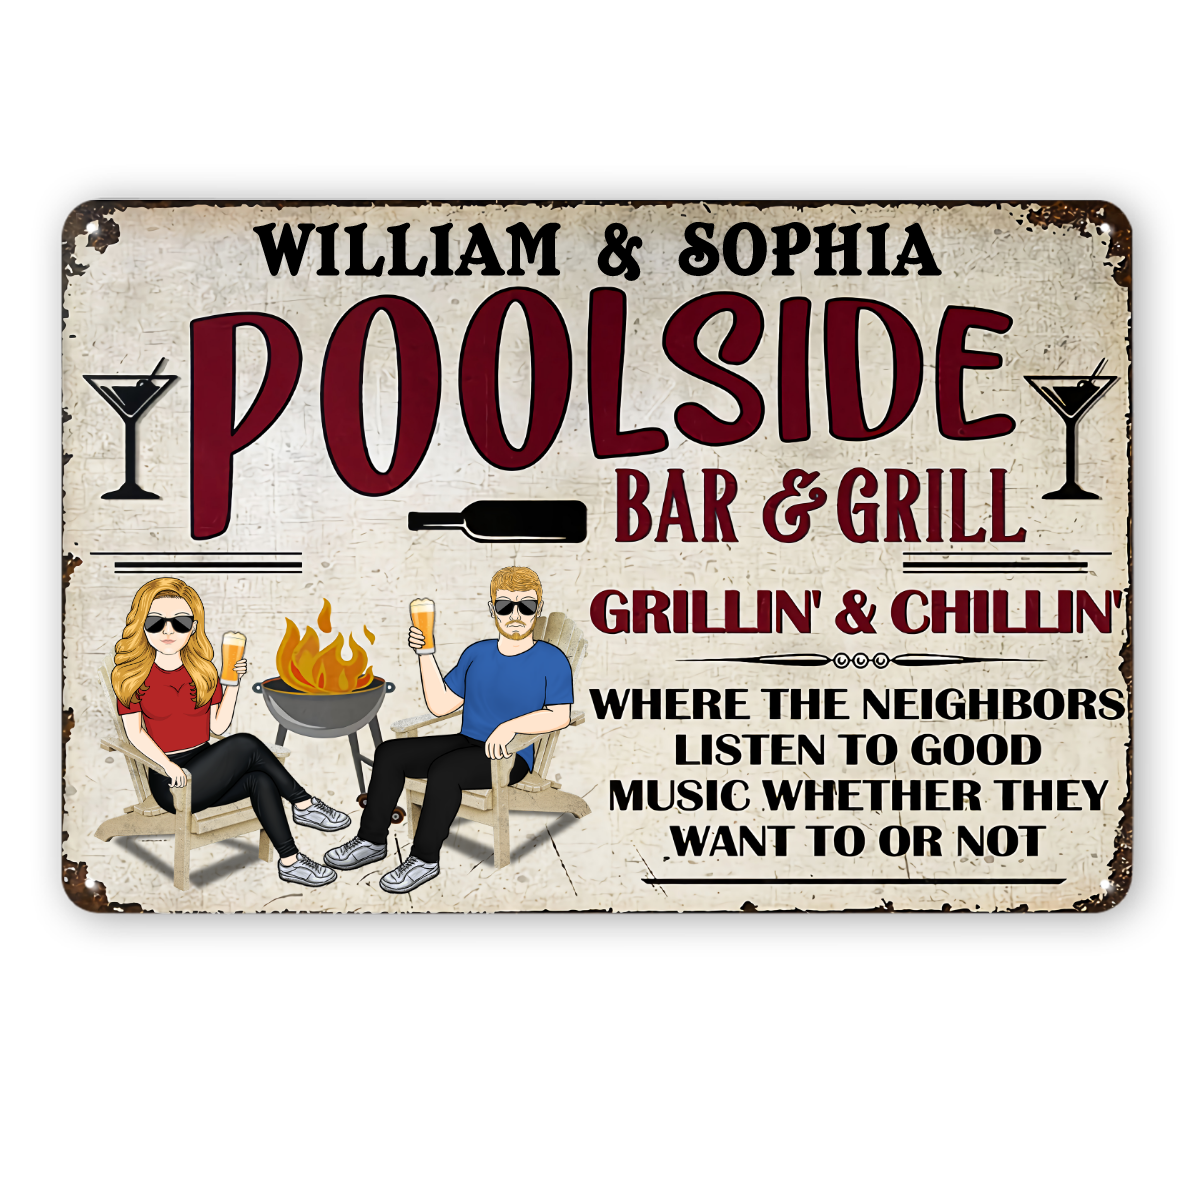 Listen To Good Music - Poolside Bar And Grill - Personalized Custom Classic Metal Signs